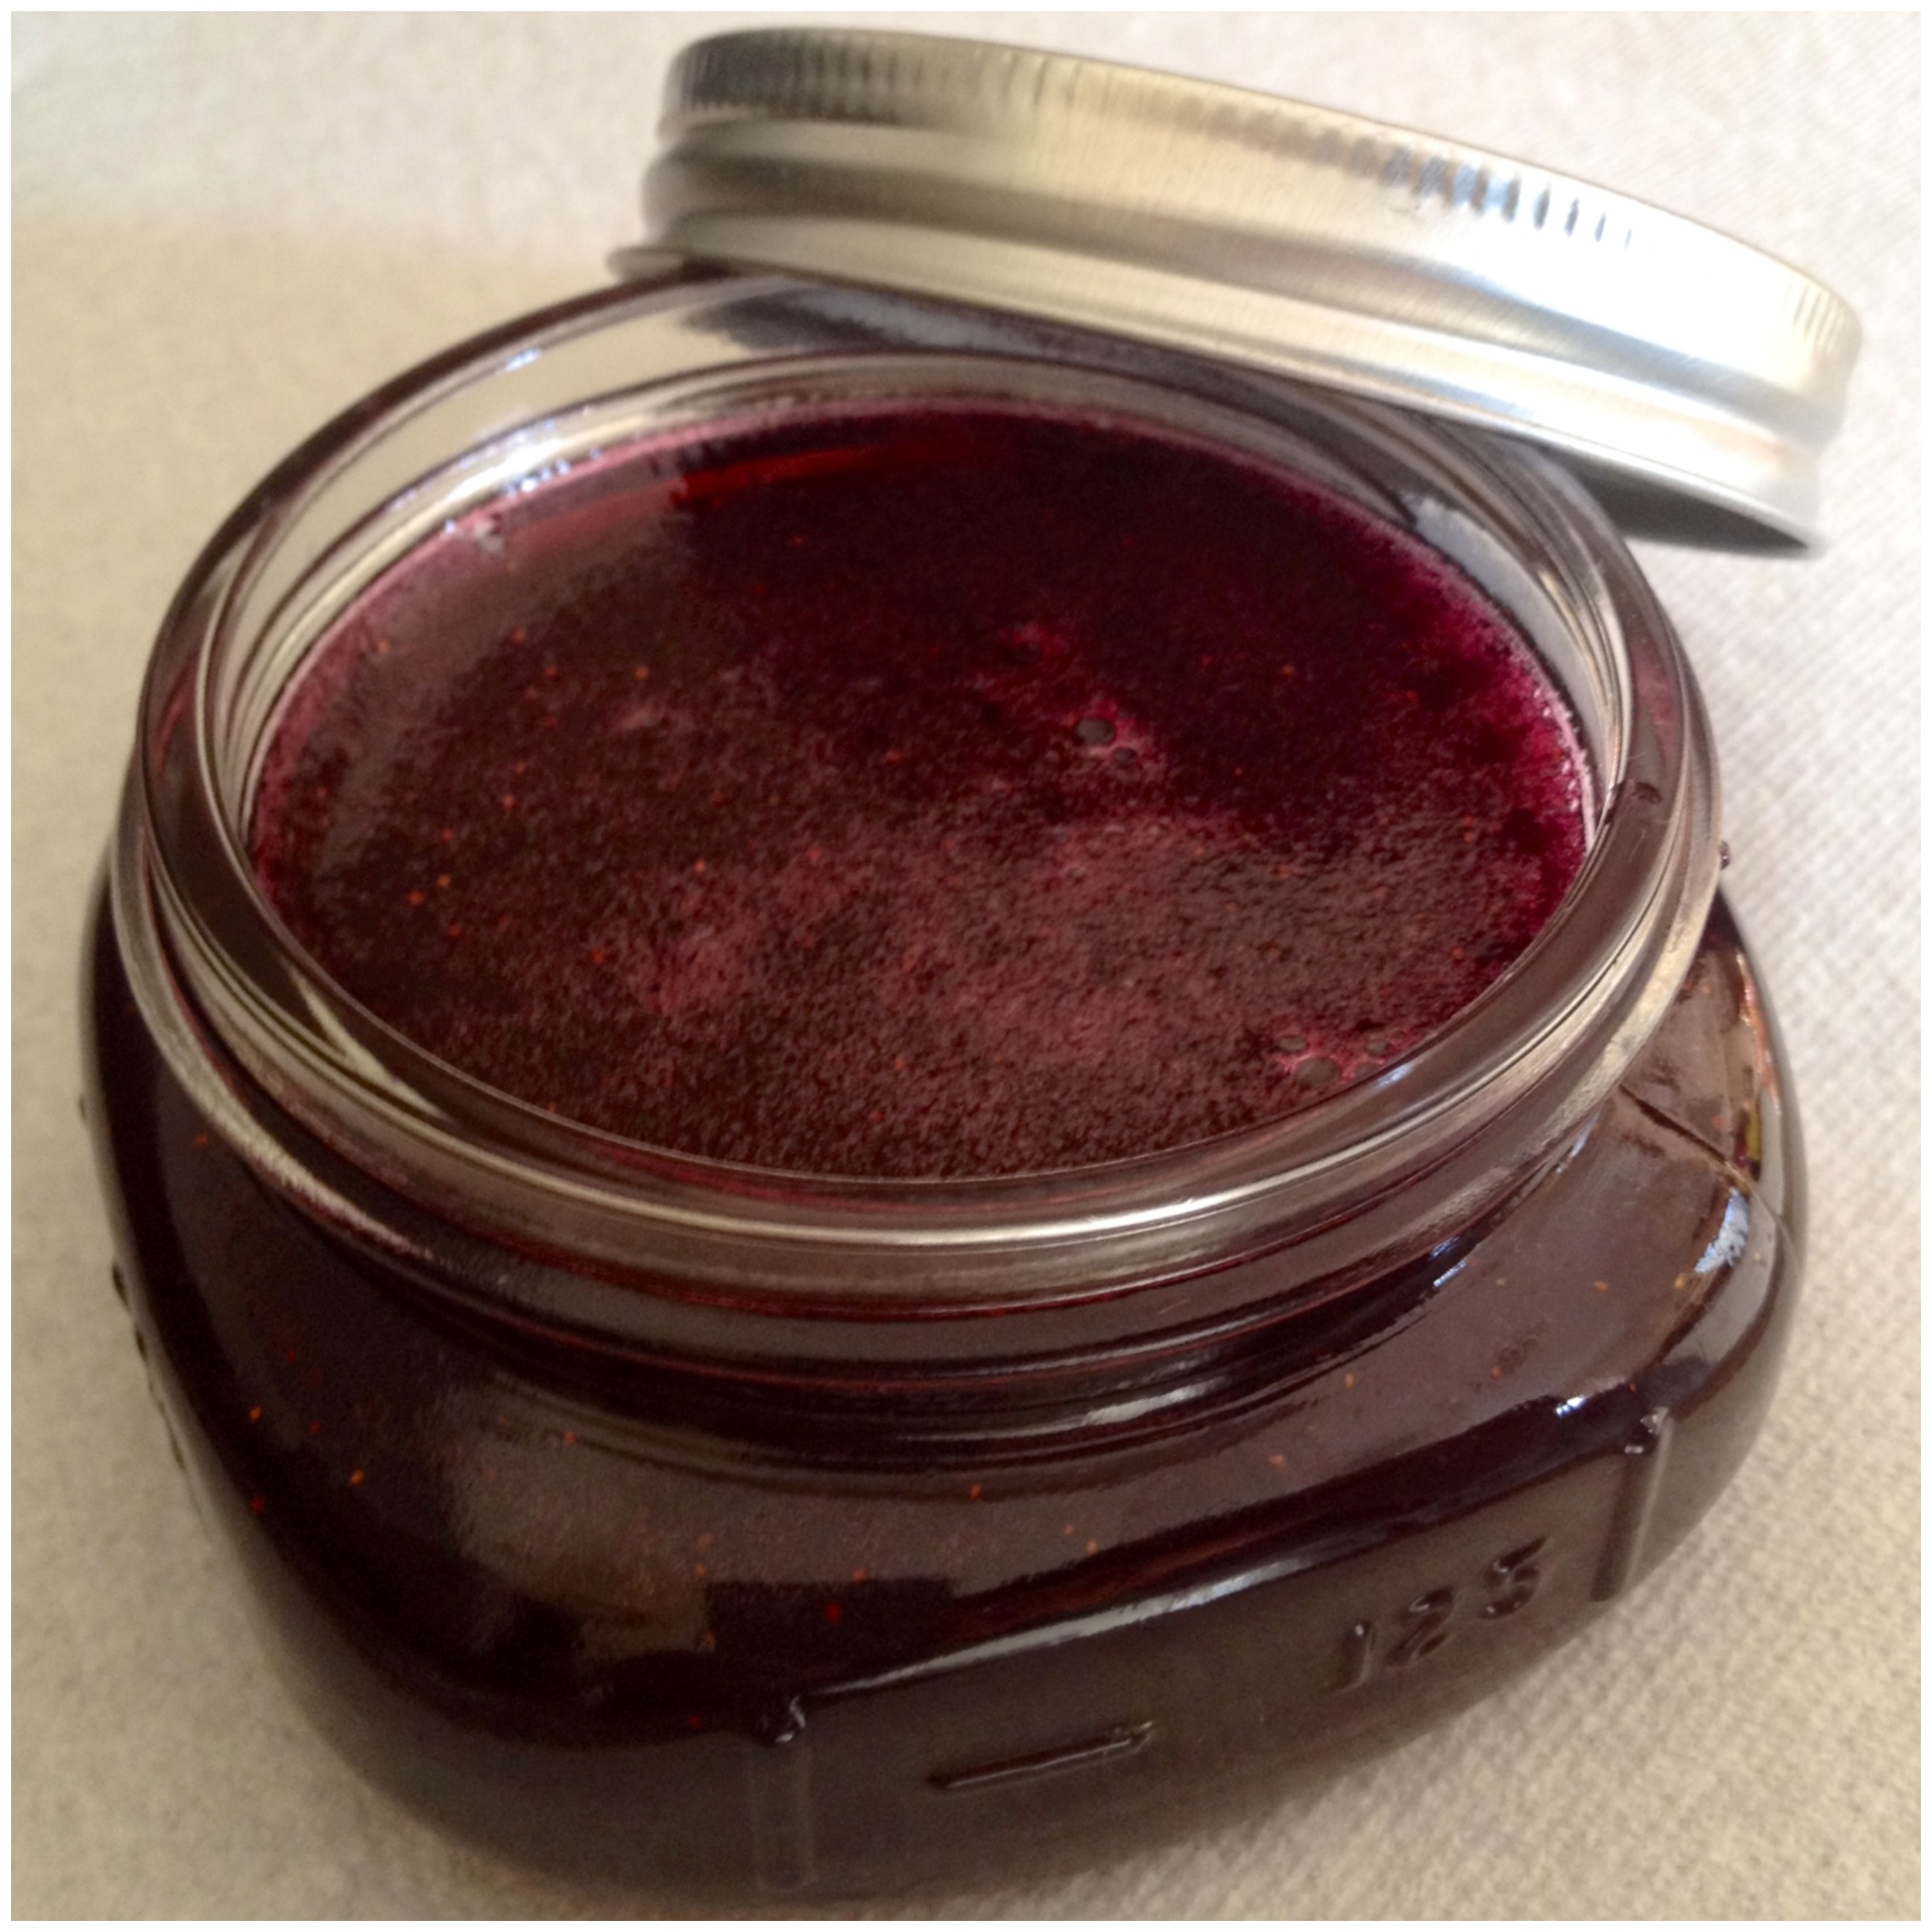 What is a good recipe for pomegranate jam?